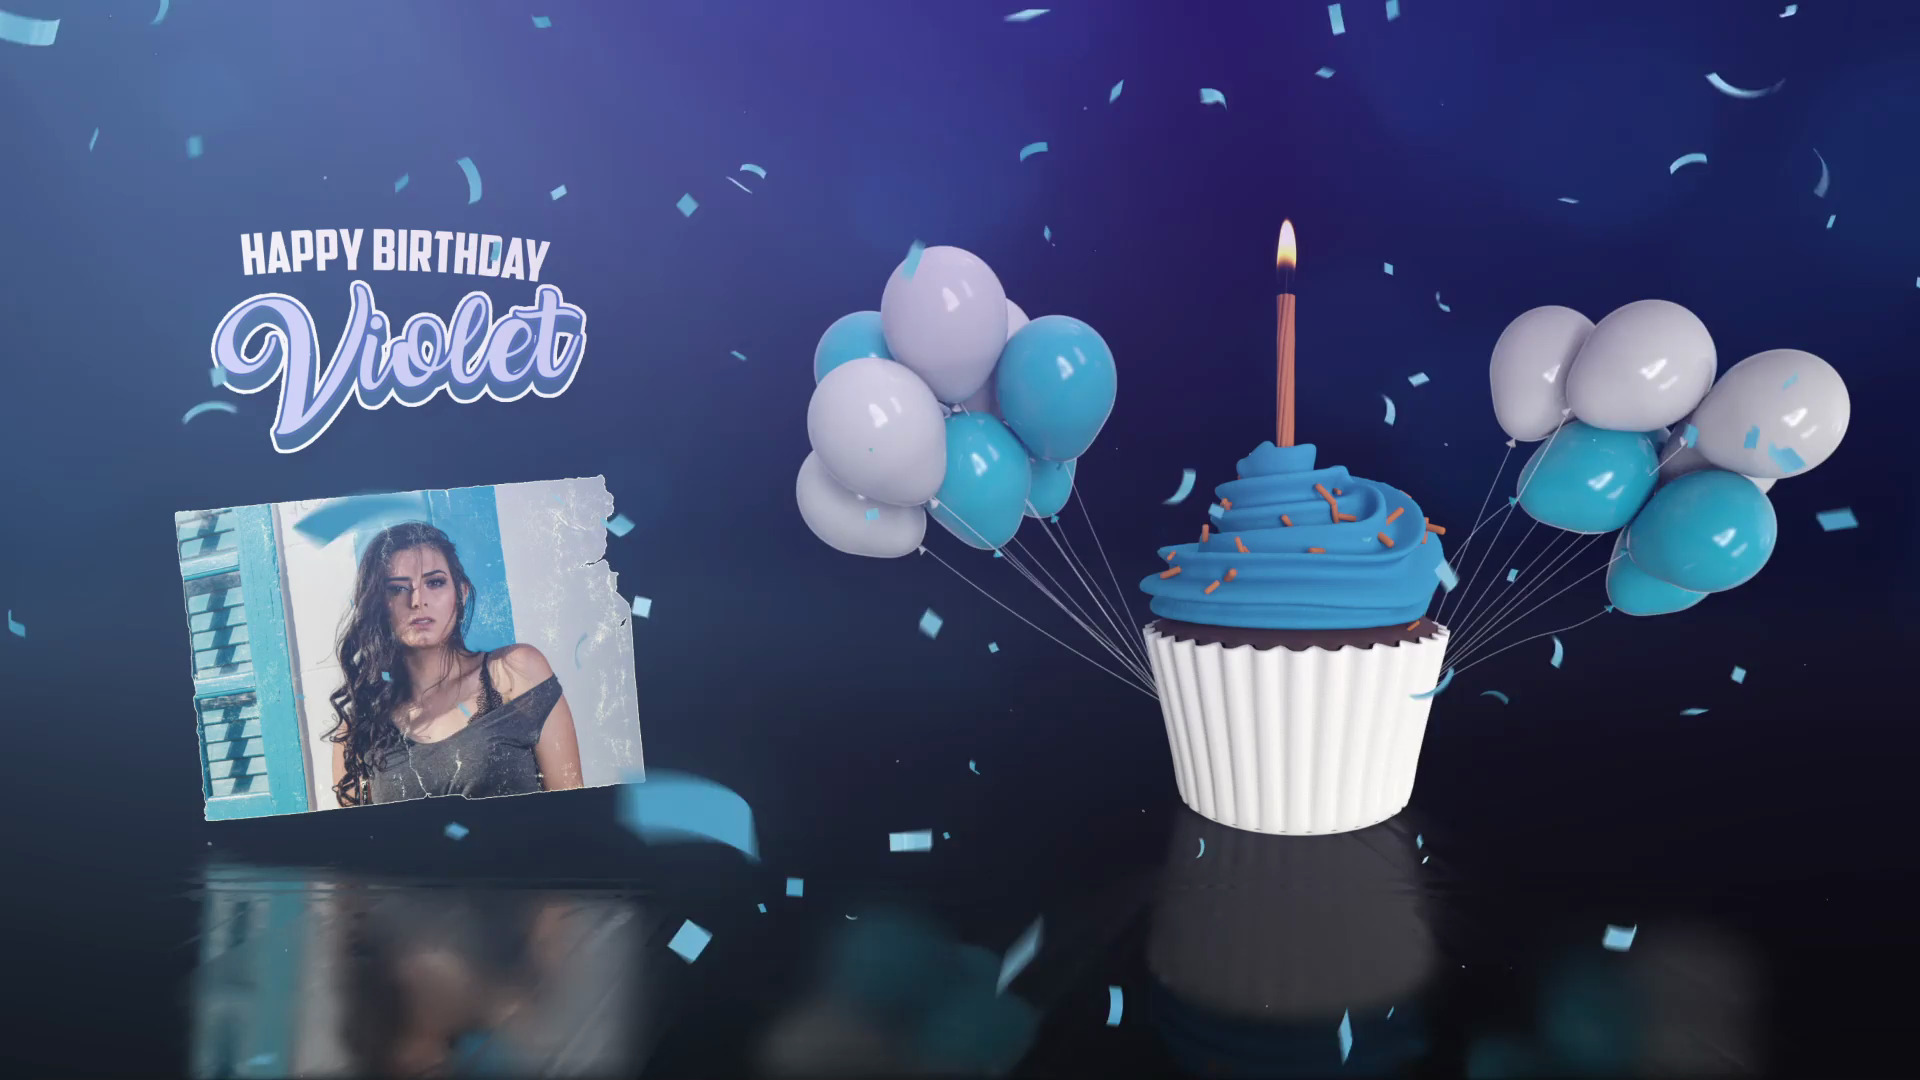 6 Top Happy Birthday Video Templates for After Effects—Including 1 Free